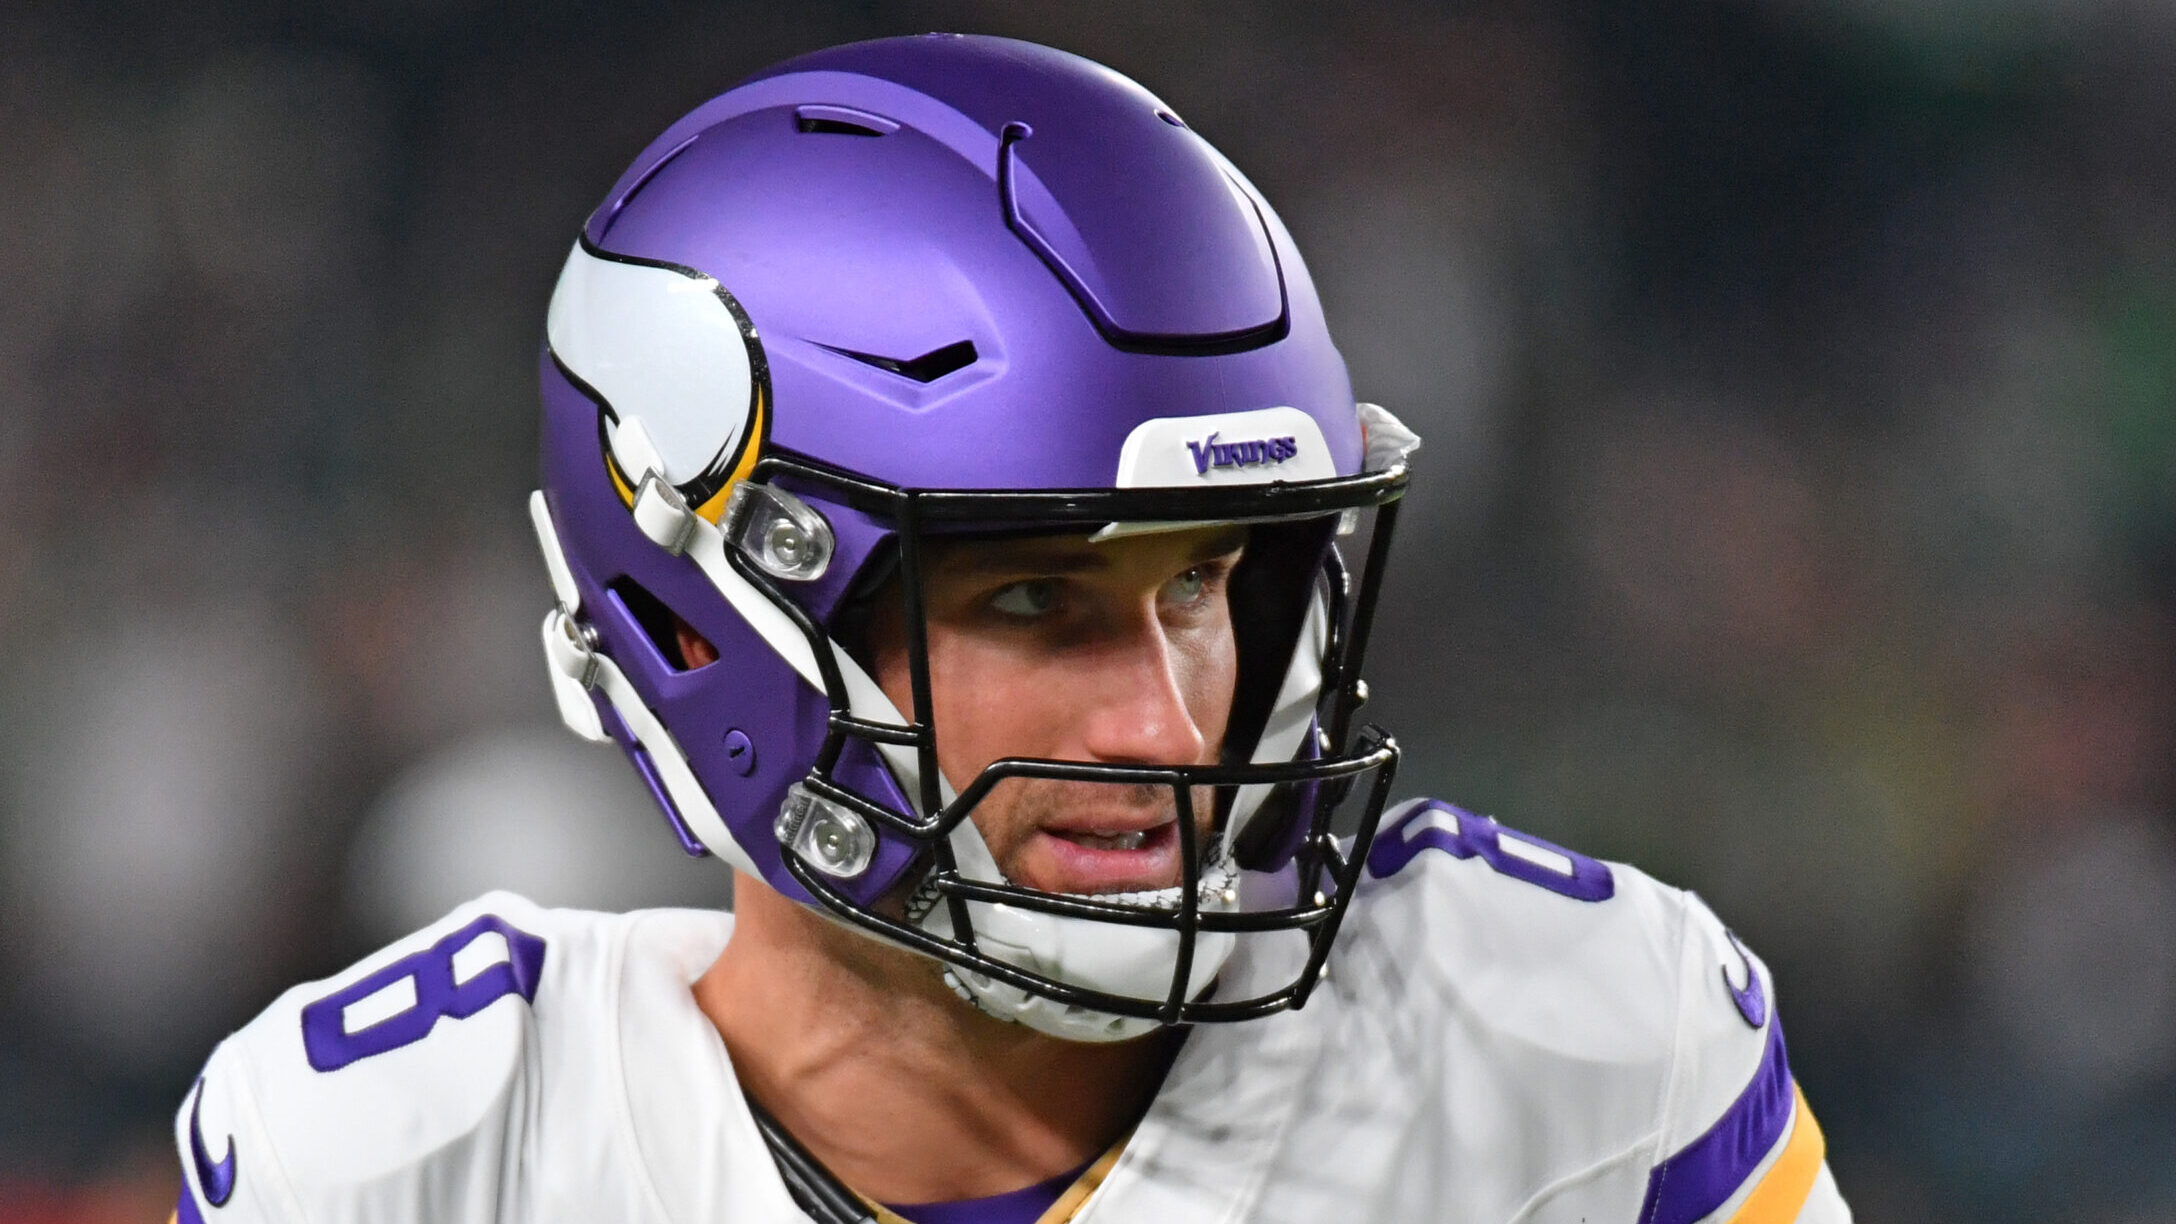 Kirk Cousins looks out while wearing his helmet